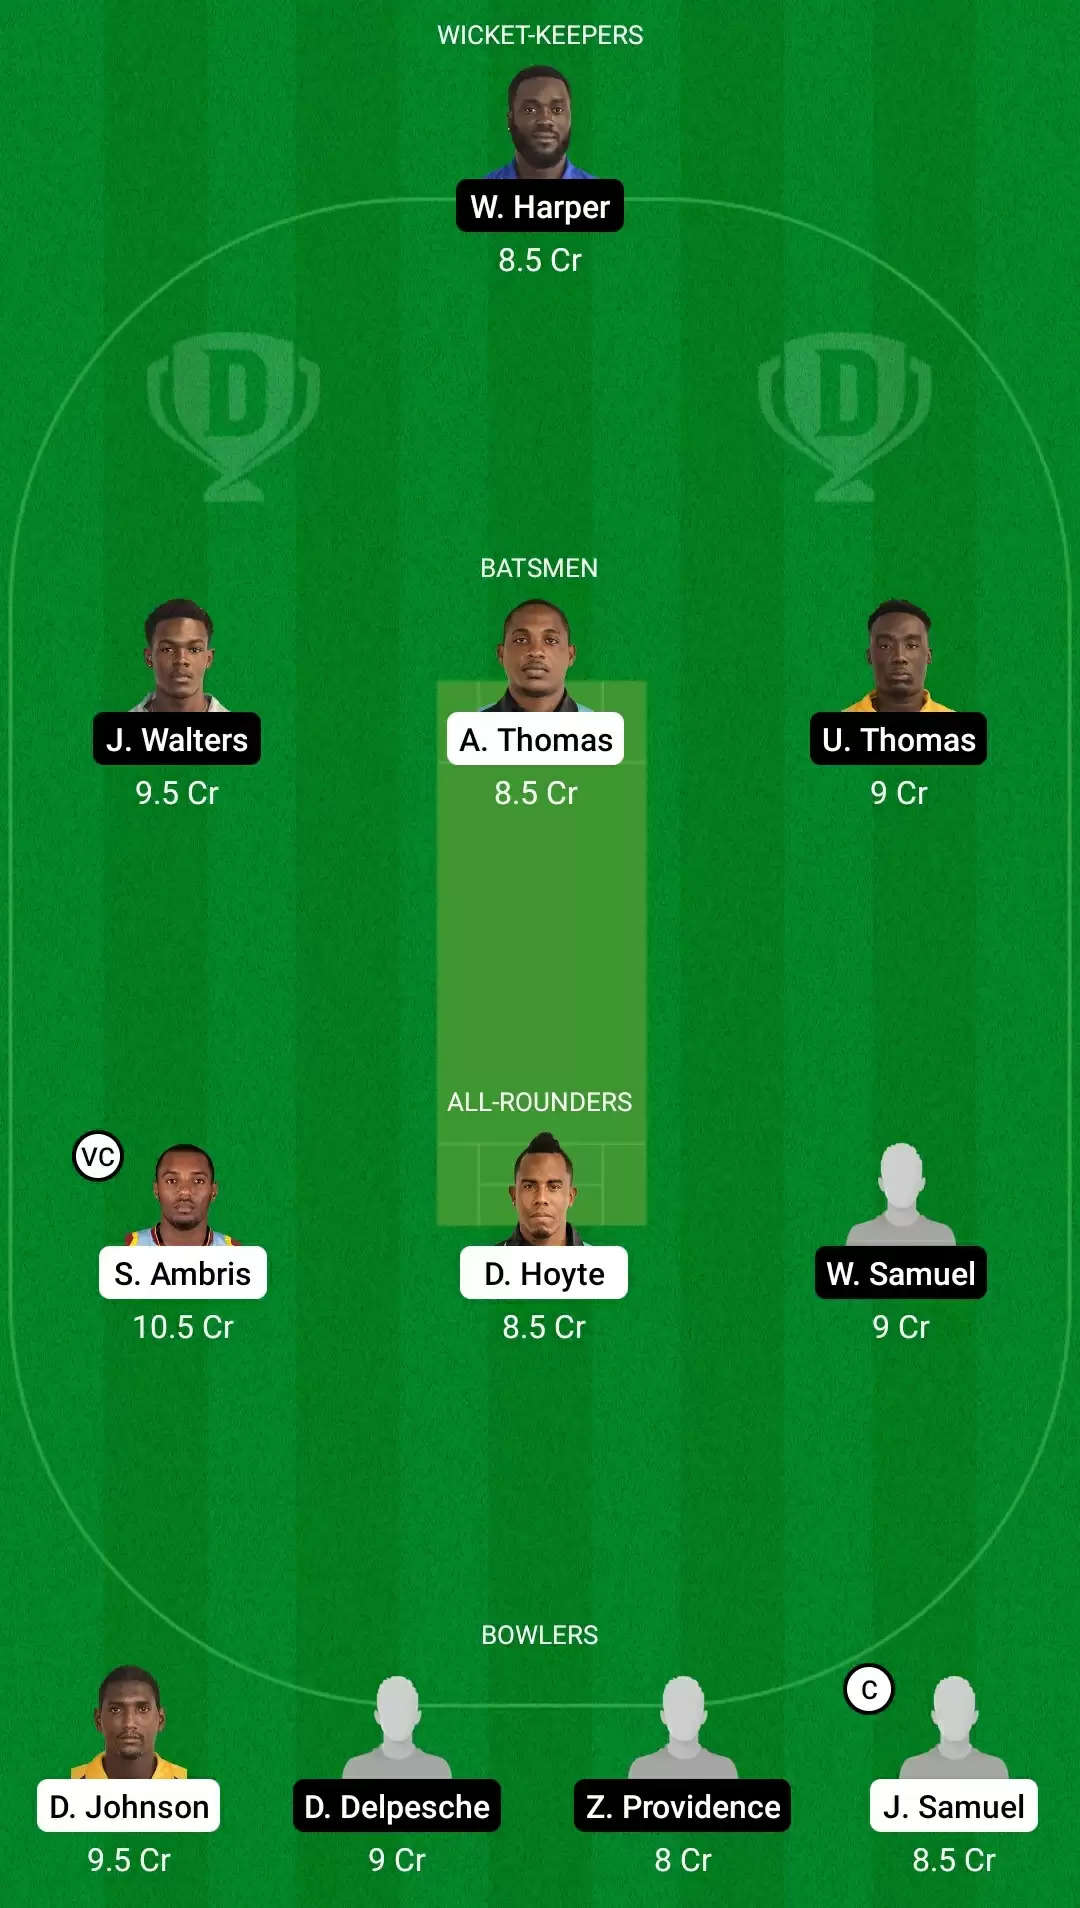 Vincy Premier League 2021, Match 19: SPB vs BGR Dream11 Prediction, Fantasy Cricket Tips, Team, Playing 11, Pitch Report, Weather Conditions and Injury Update